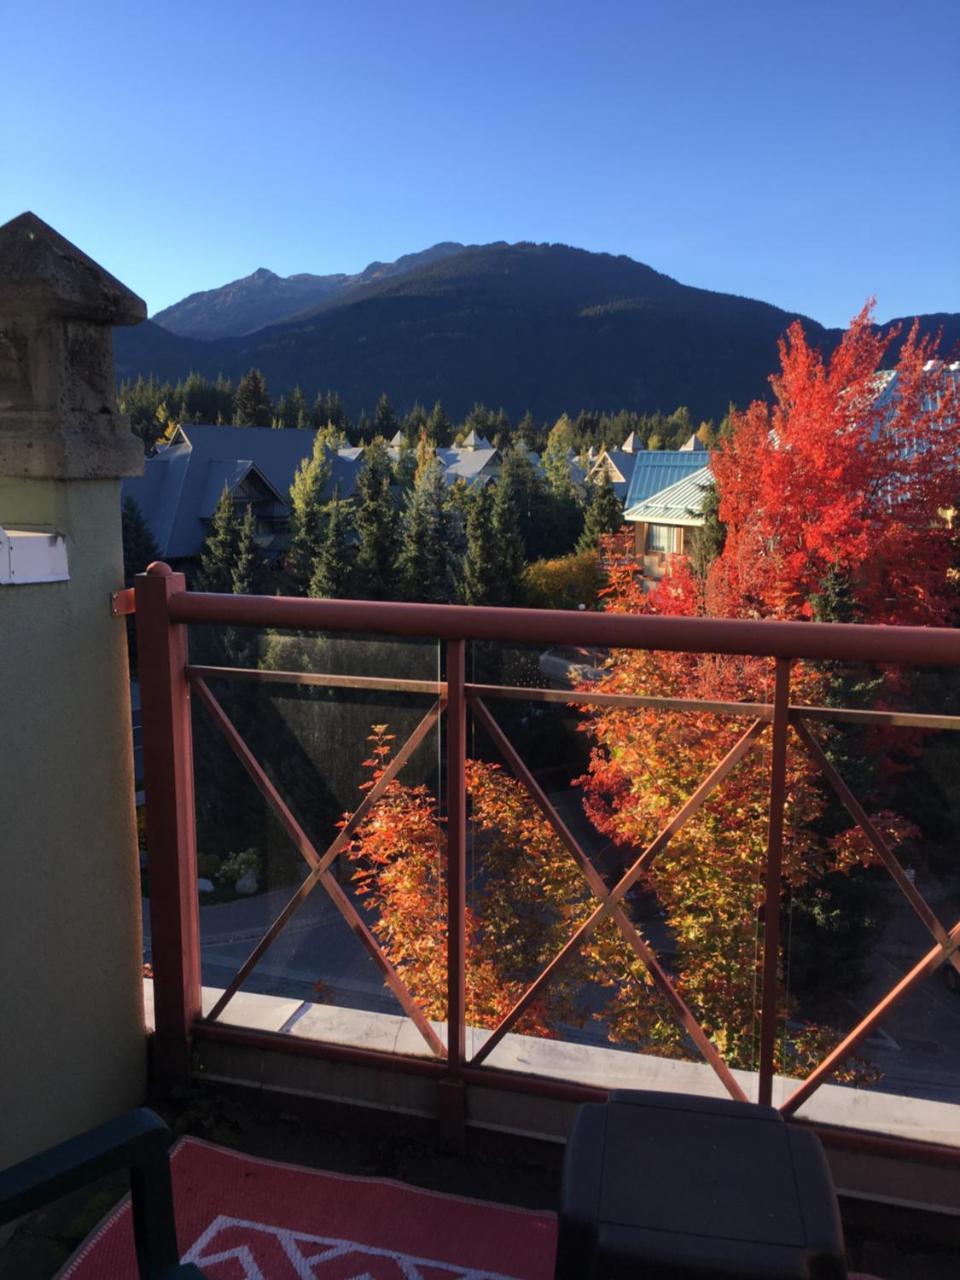 Beautiful Whistler Village Alpenglow Suite Queen Size Bed Air Conditioning Cable And Smarttv Wifi Fireplace Pool Hot Tub Sauna Gym Balcony Mountain Views Eksteriør bilde